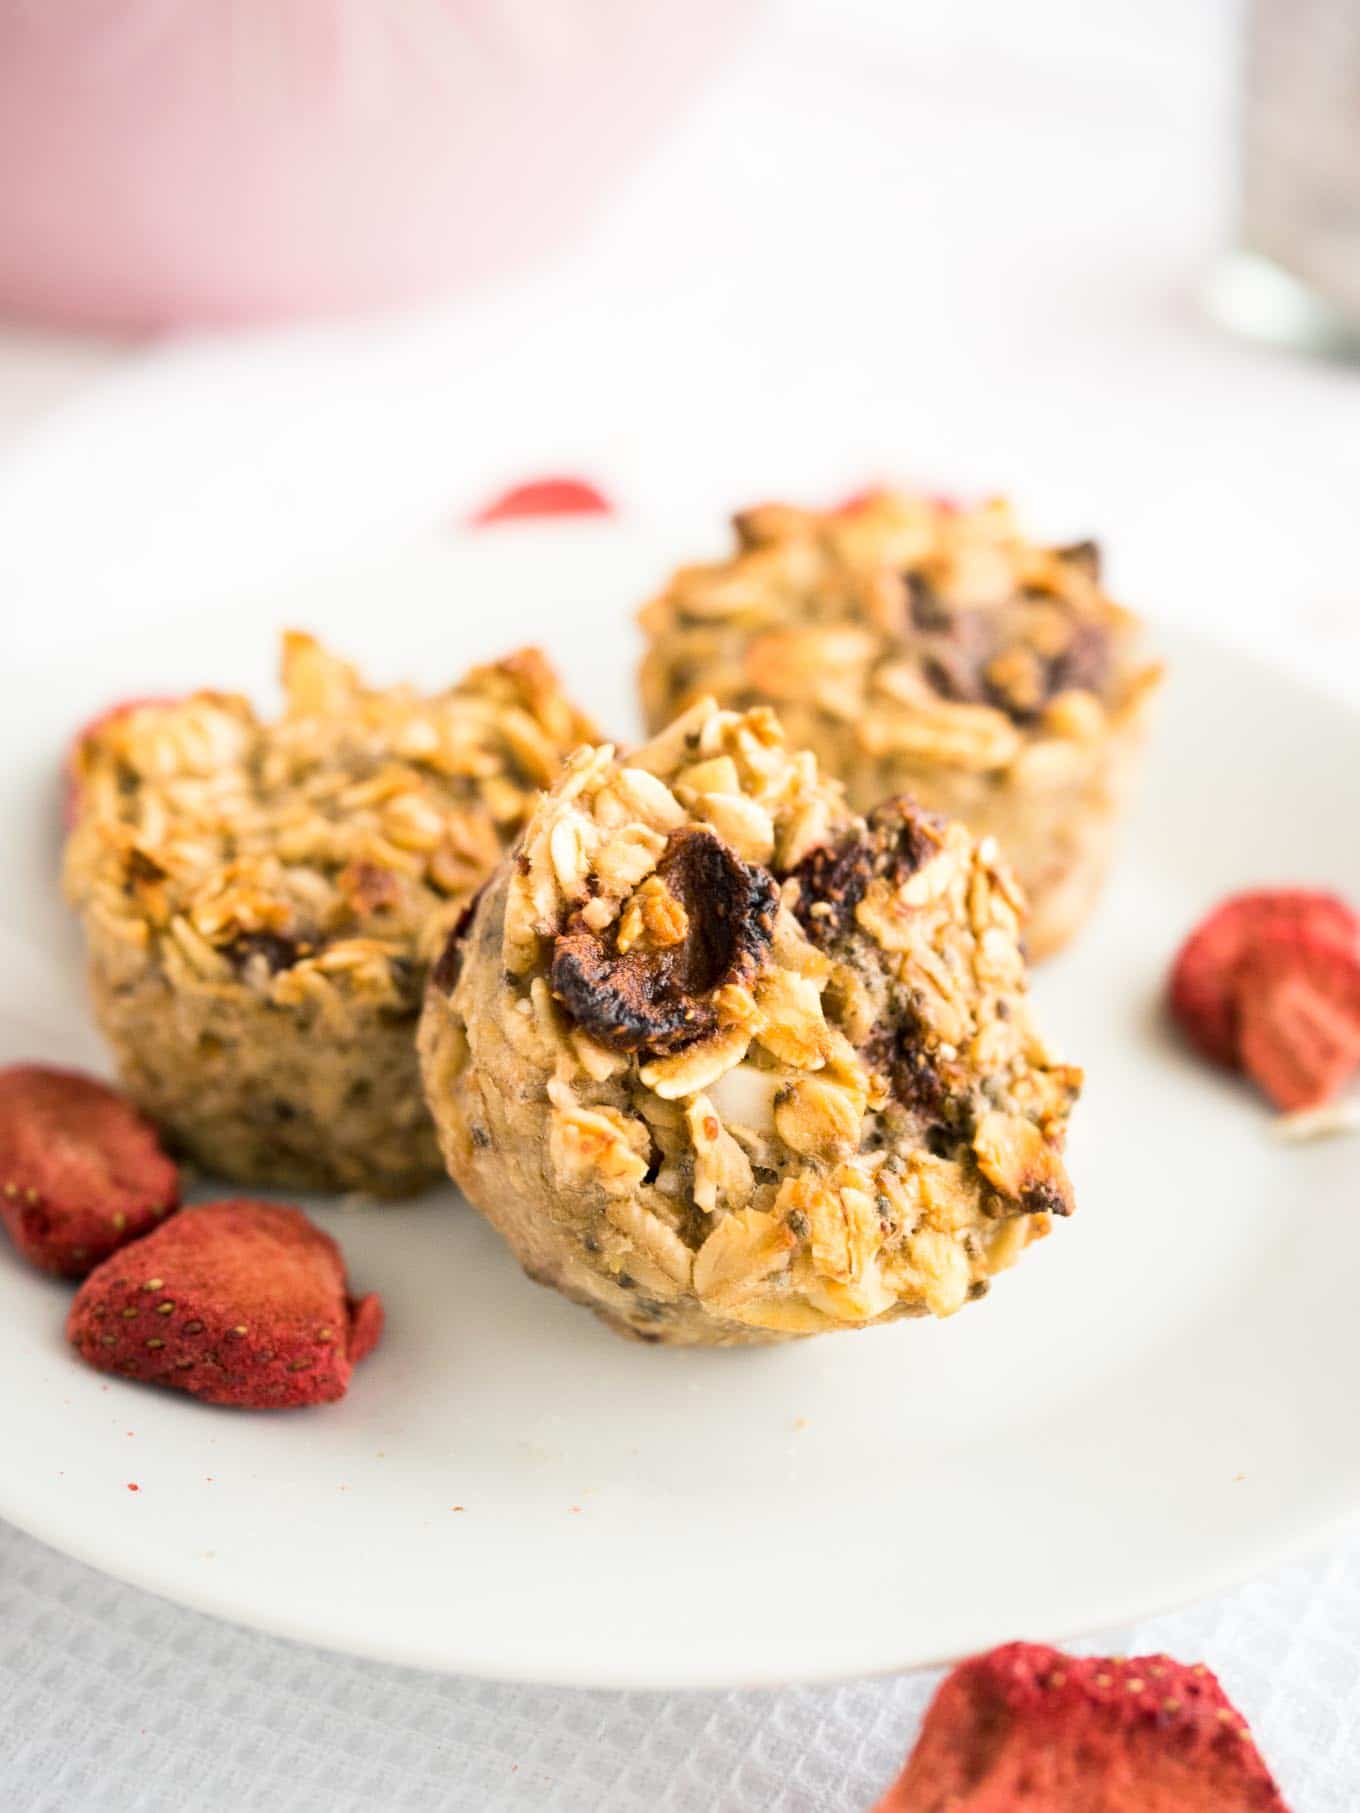 These Strawberry Baked Oatmeal Cups are perfect for busy mornings! A healthy grab-and-go breakfast or snack filled with oats, strawberries, and chia seeds.